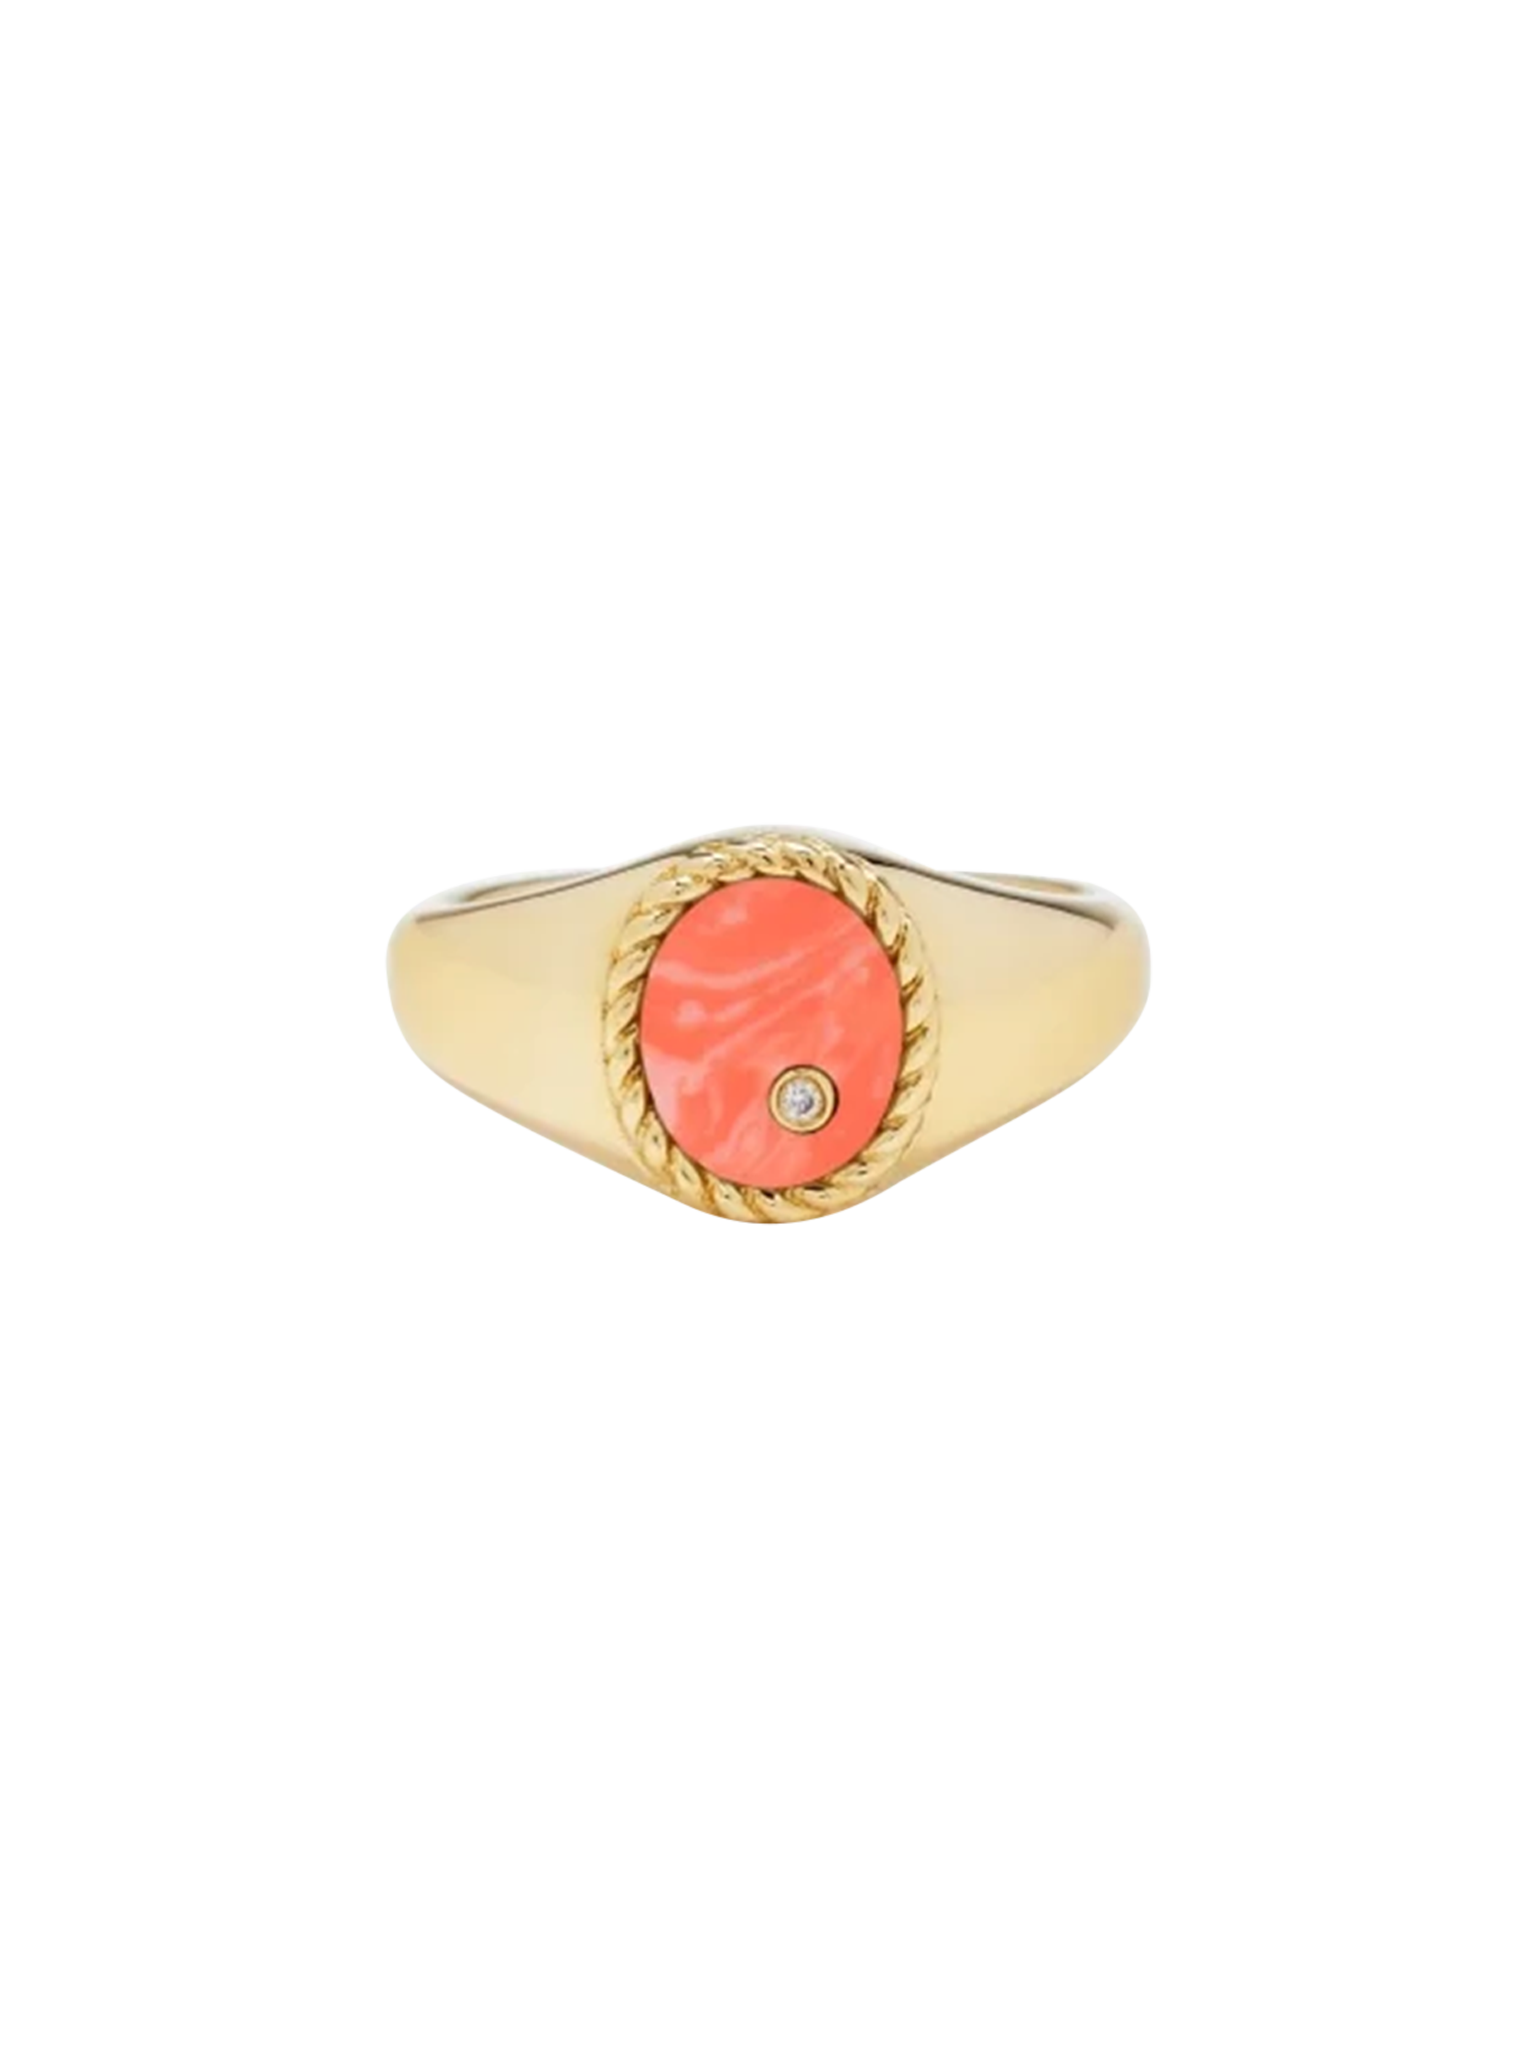 Baby chevalière ovale corail or jaune ring